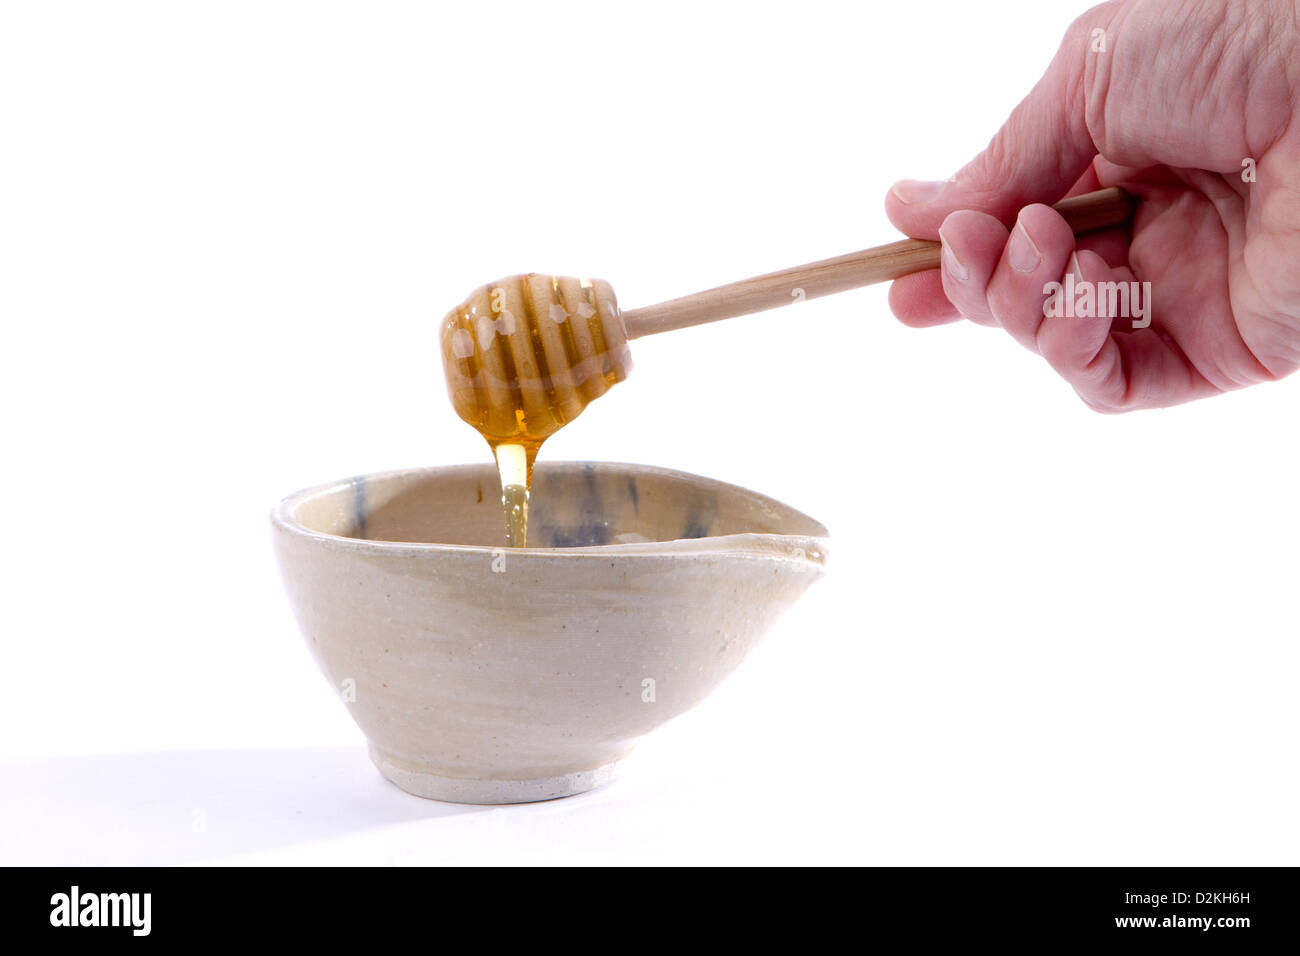 Man's hand holding a dripping honey dipper over a bowl. Stock Photo